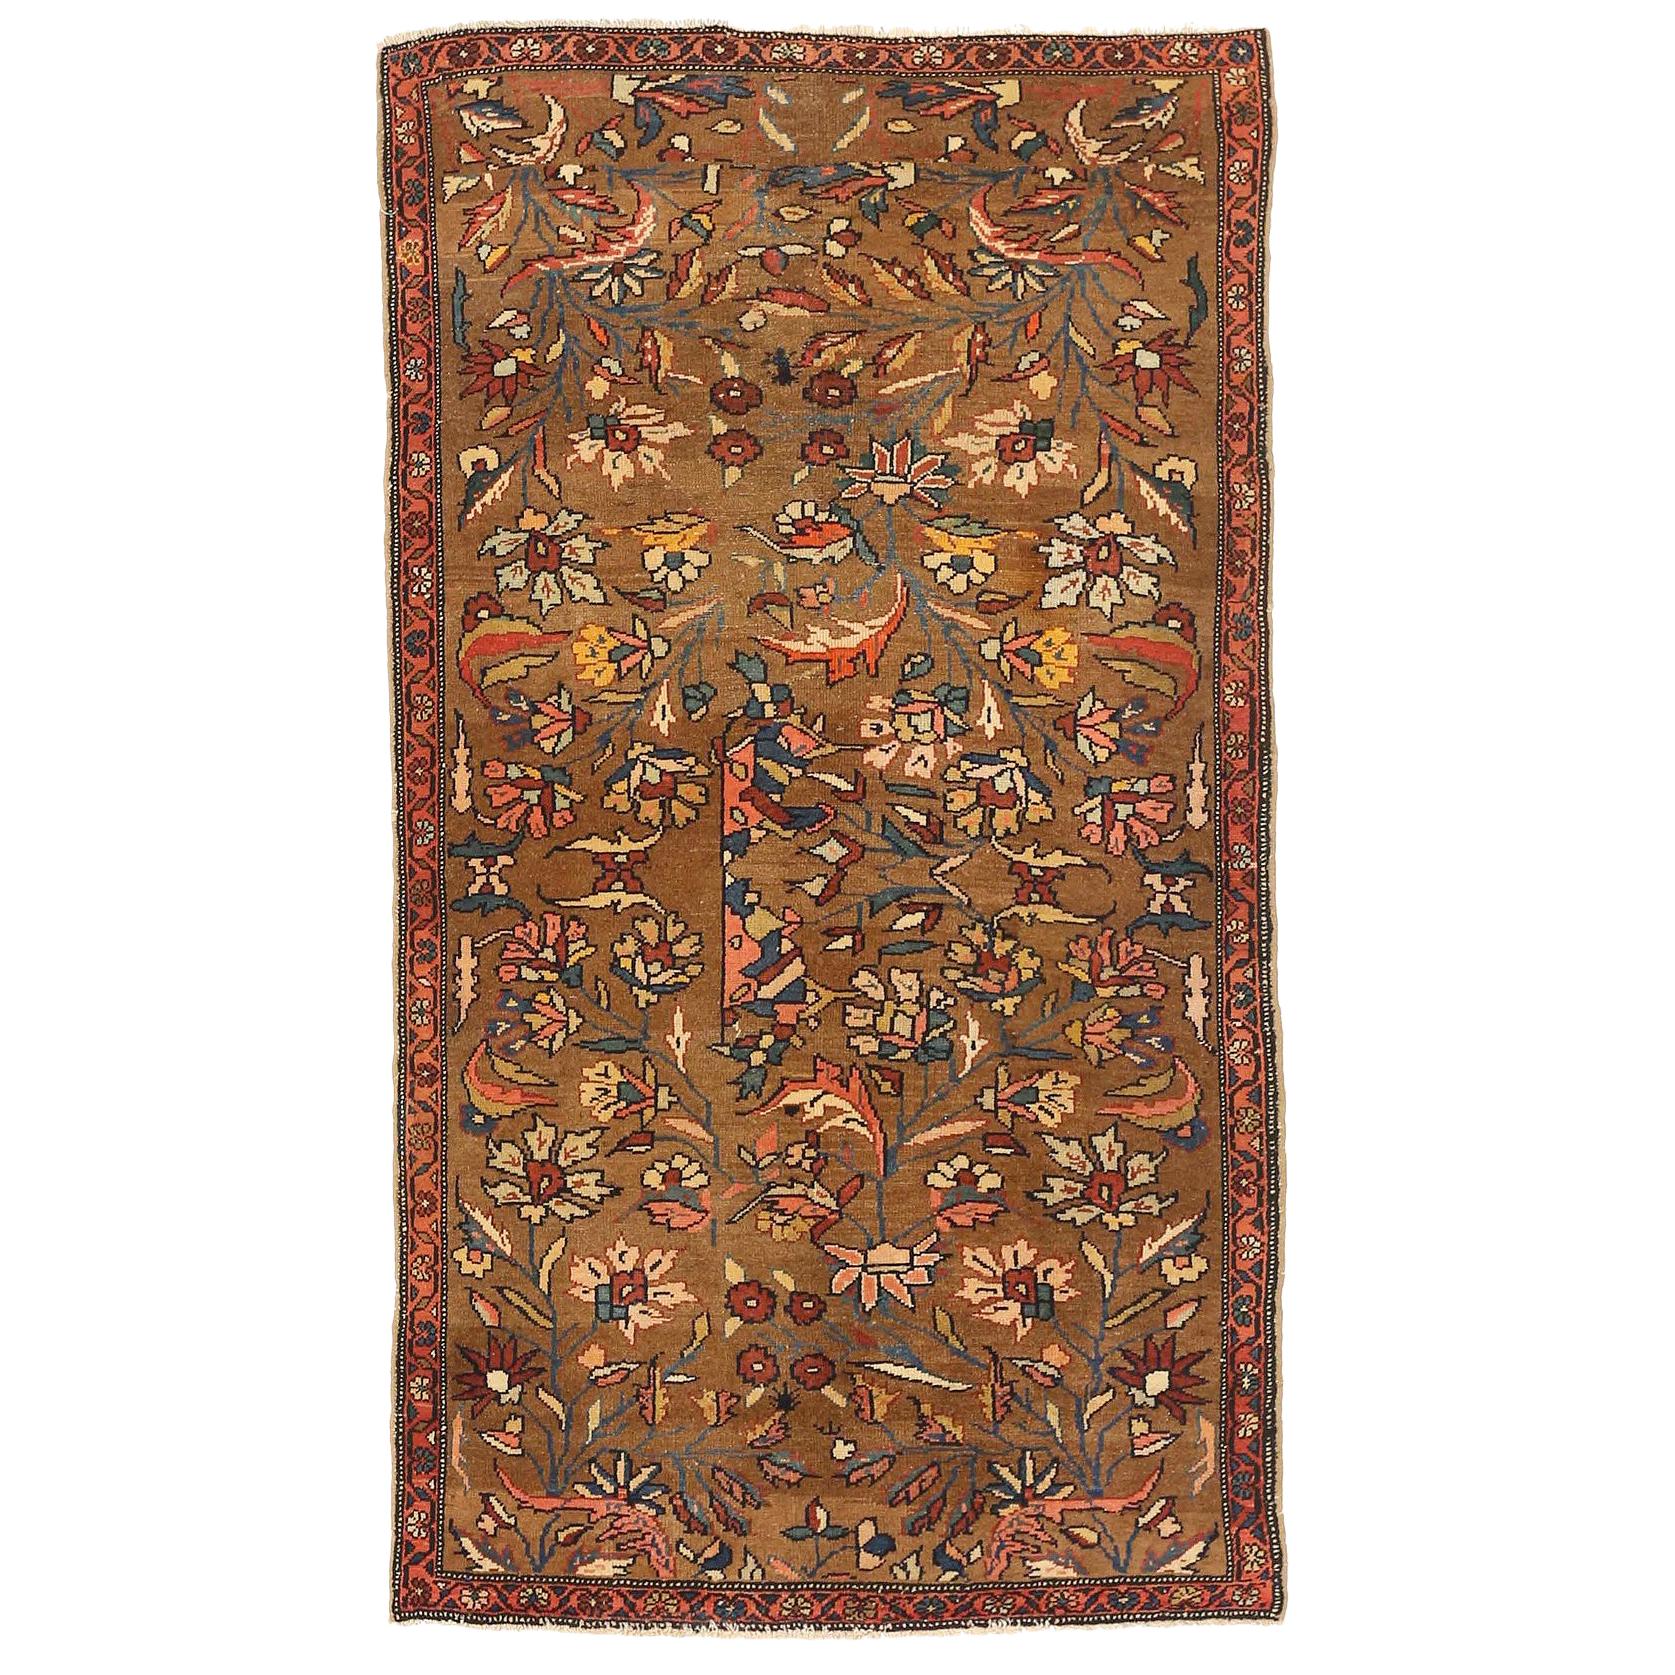 Antique Persian Hamadan Rug with Pink & Navy Flower Details on Brown Field